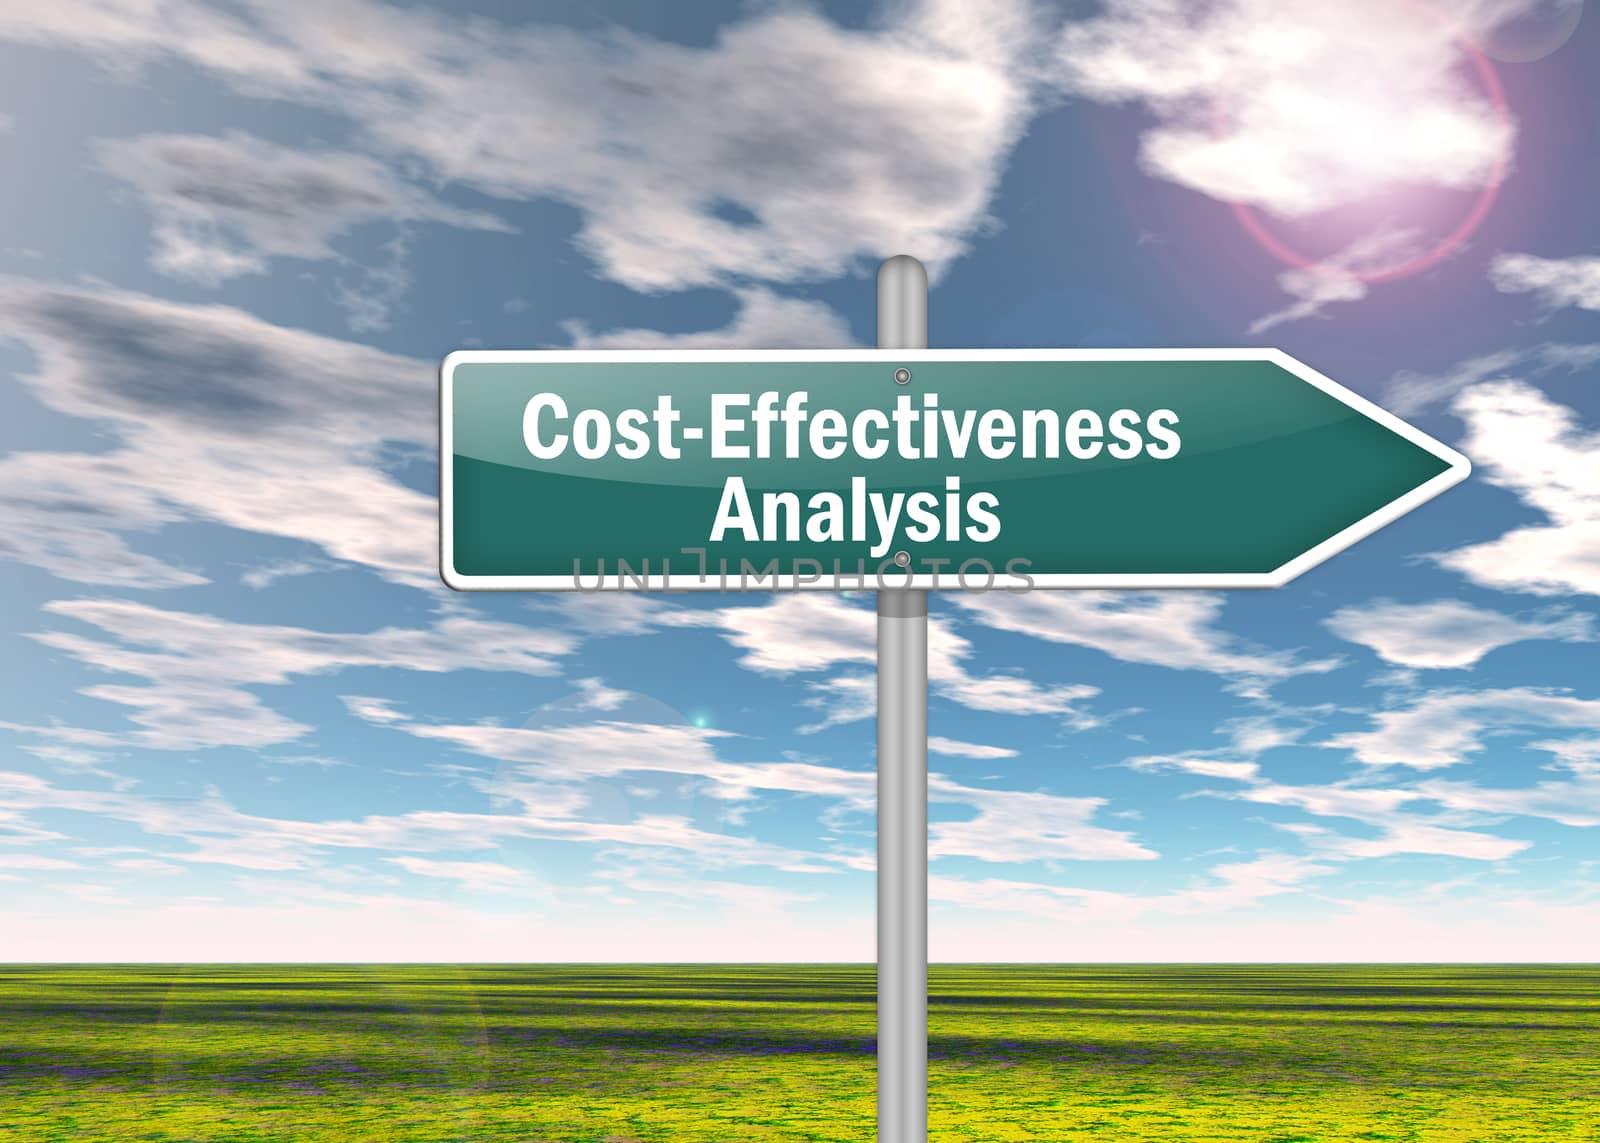 Signpost "Cost-Effectiveness Analysis" by mindscanner